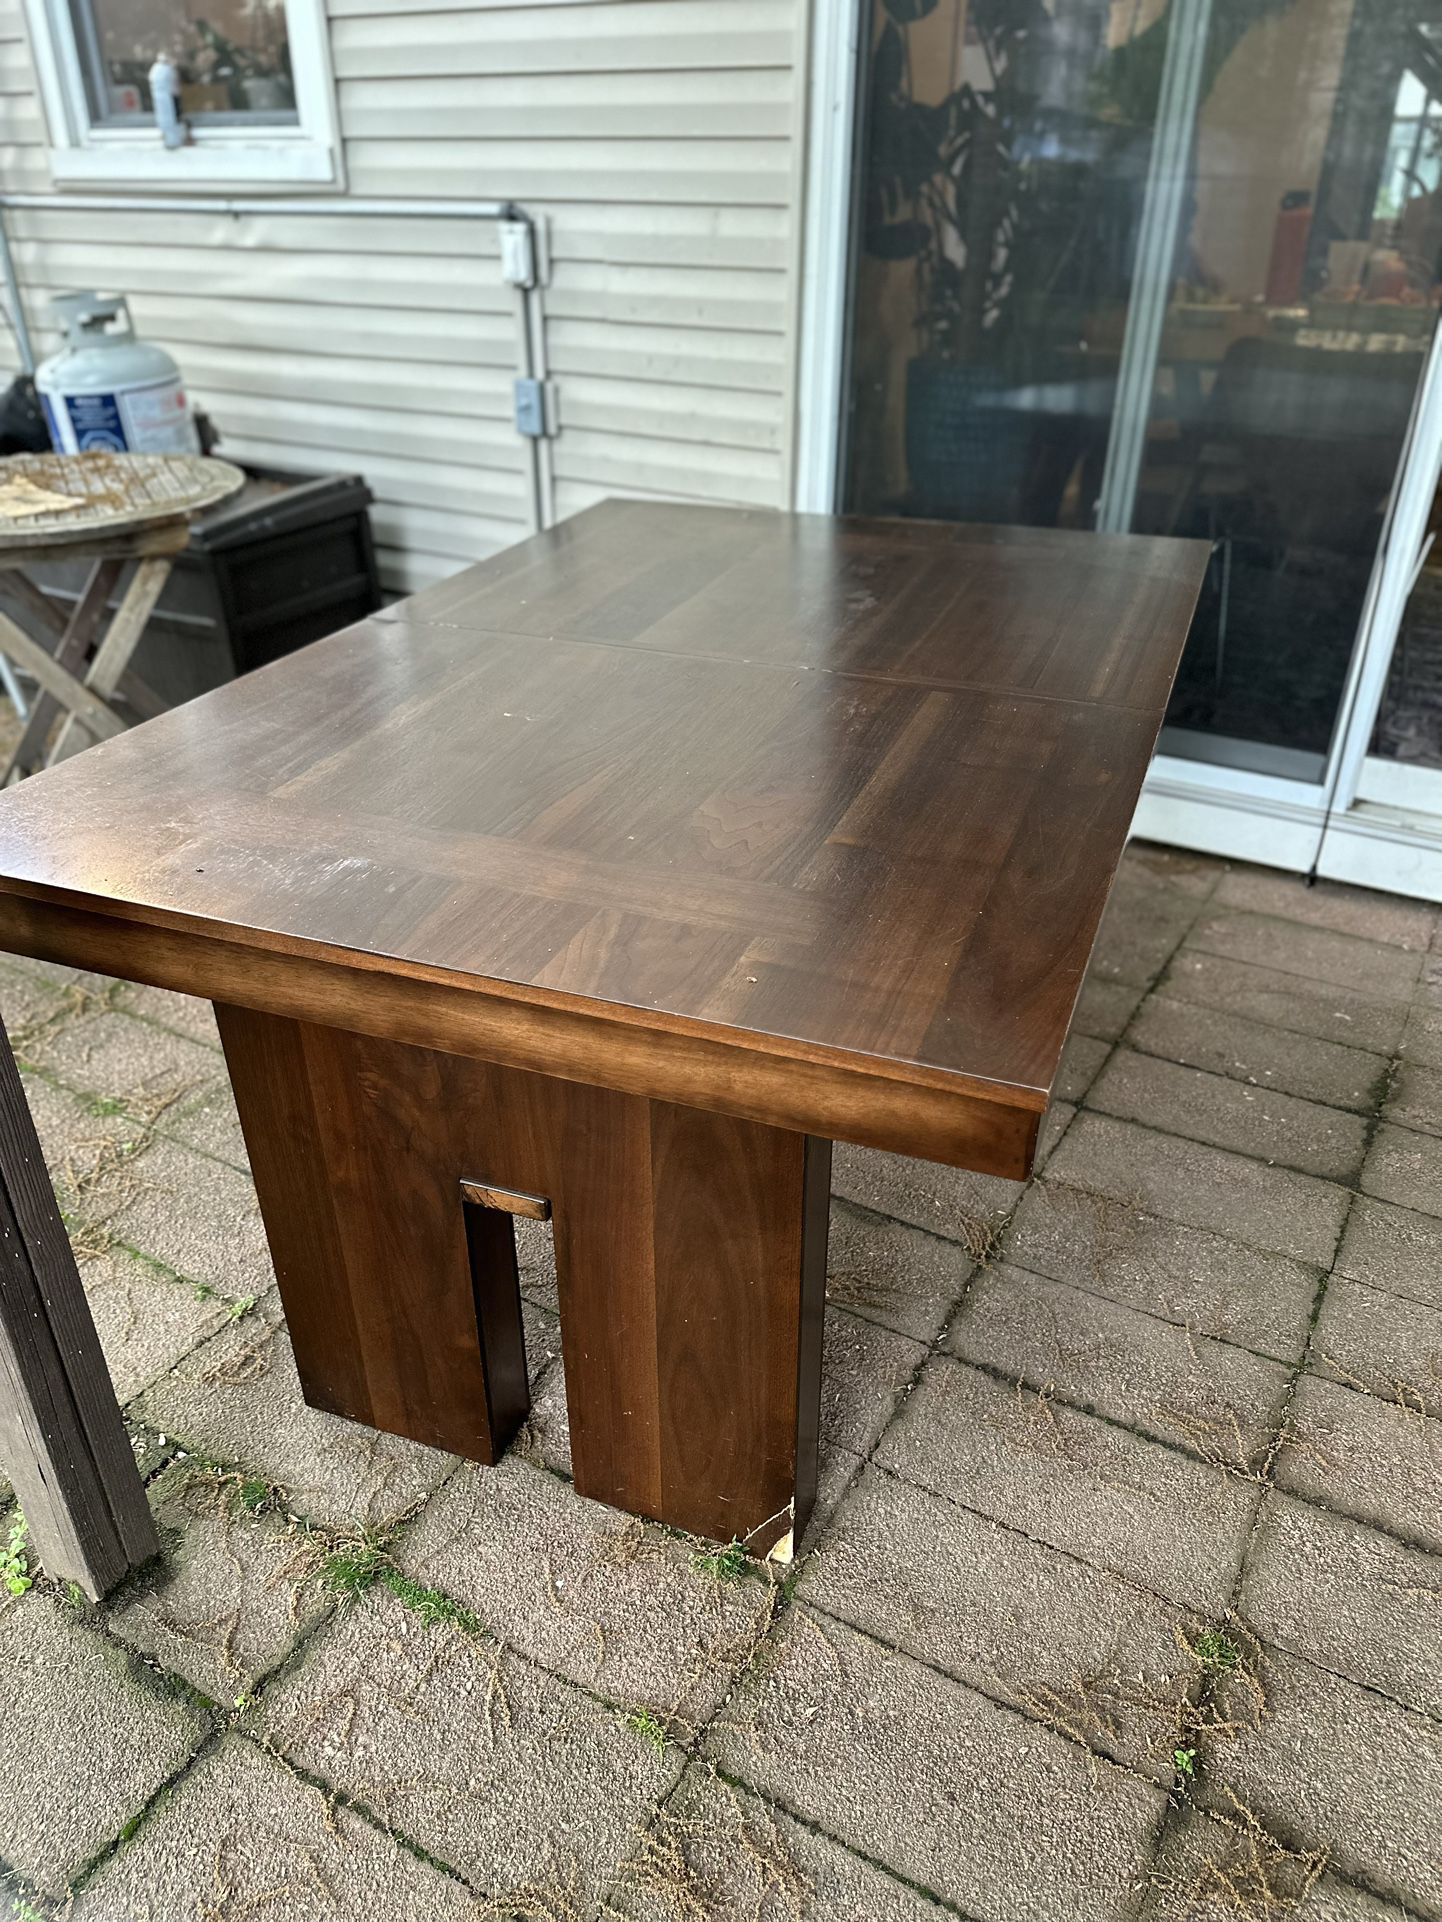 FREE Dining Table With Leaf and Bench